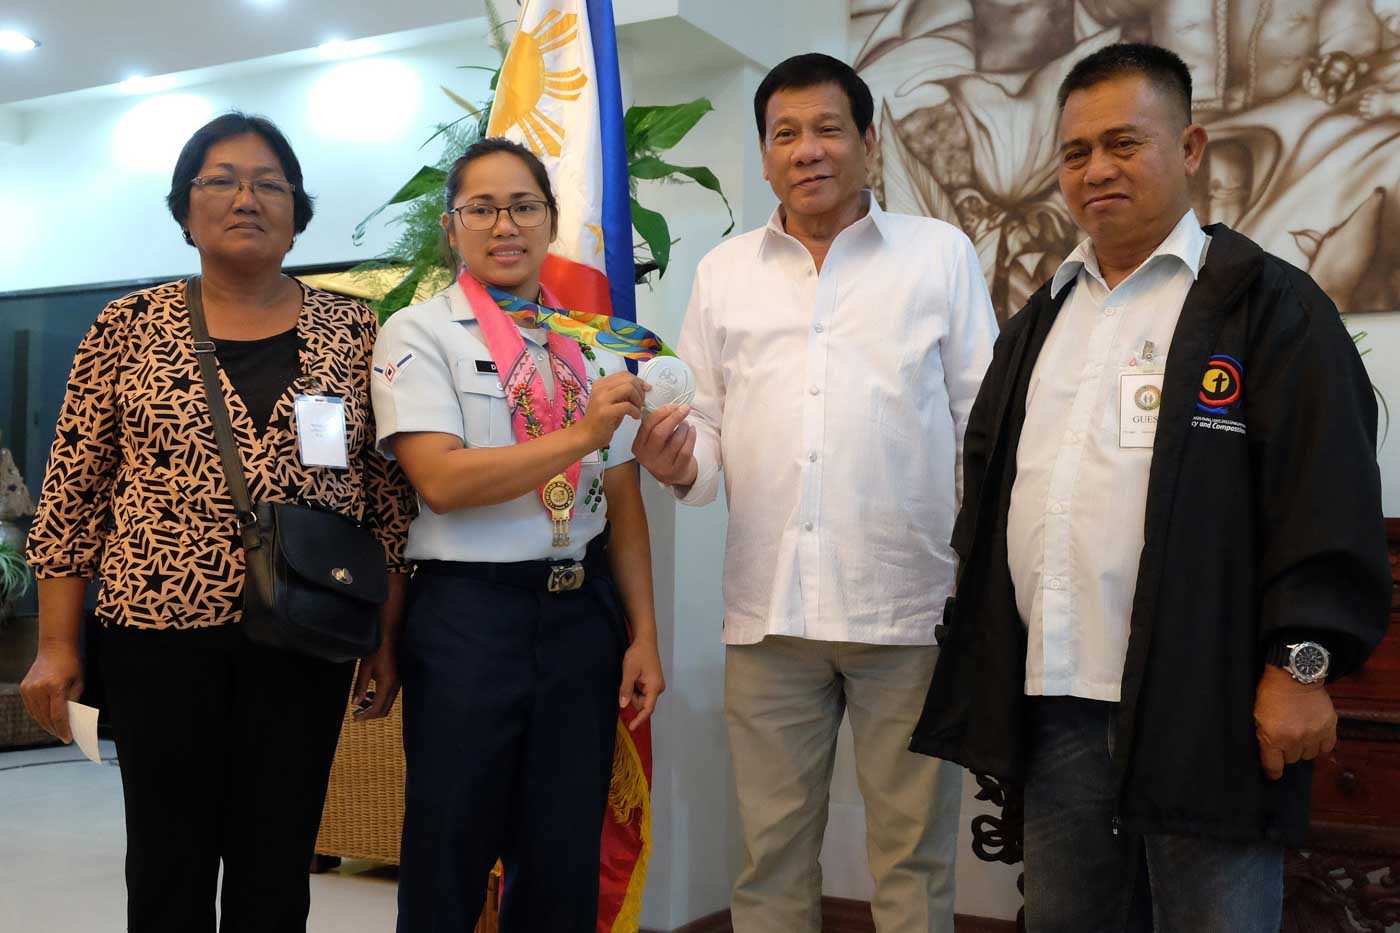 President Rodrigo Duterte poses with the first Filipina and Mindanaoan Olympic silver medalist Hidilyn Diaz and her parents Eduardo and Emelita at the Presidential Guest House in Panacan, Davao City on August 11. Photo by Ace Morandante/PPD  